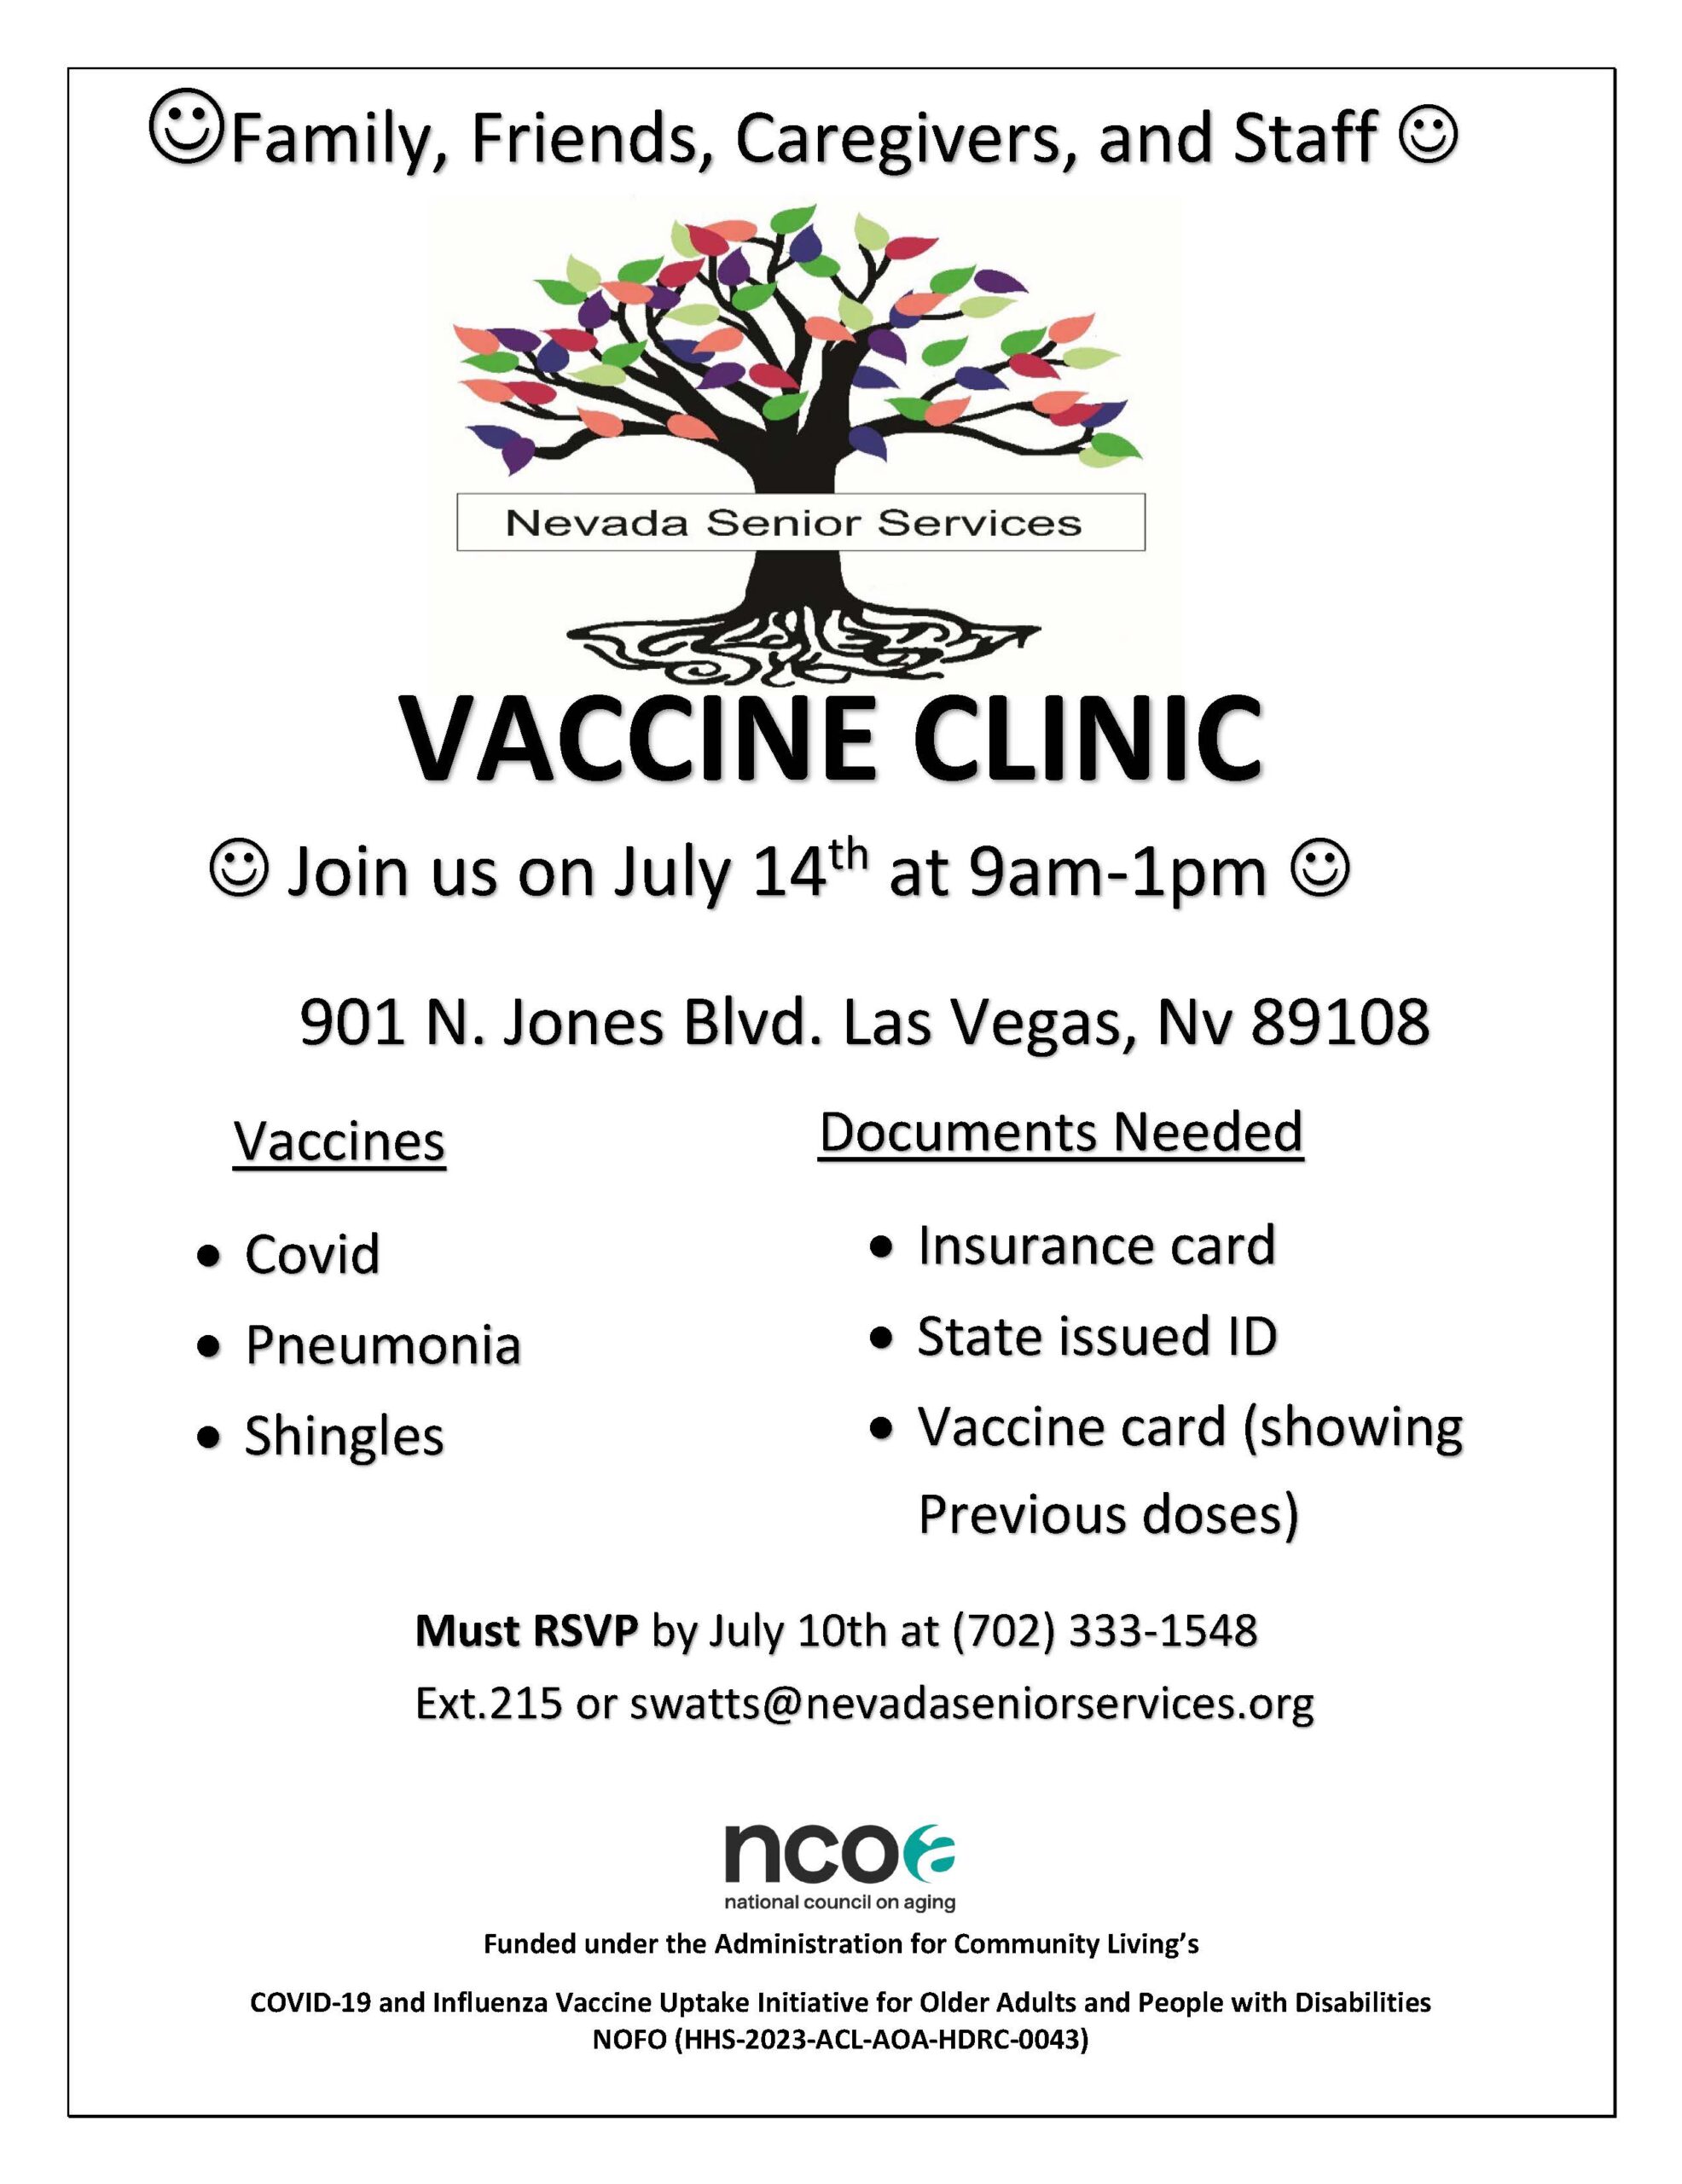 Thumbnail for the post titled: Nevada Senior Services Vaccine Clinics